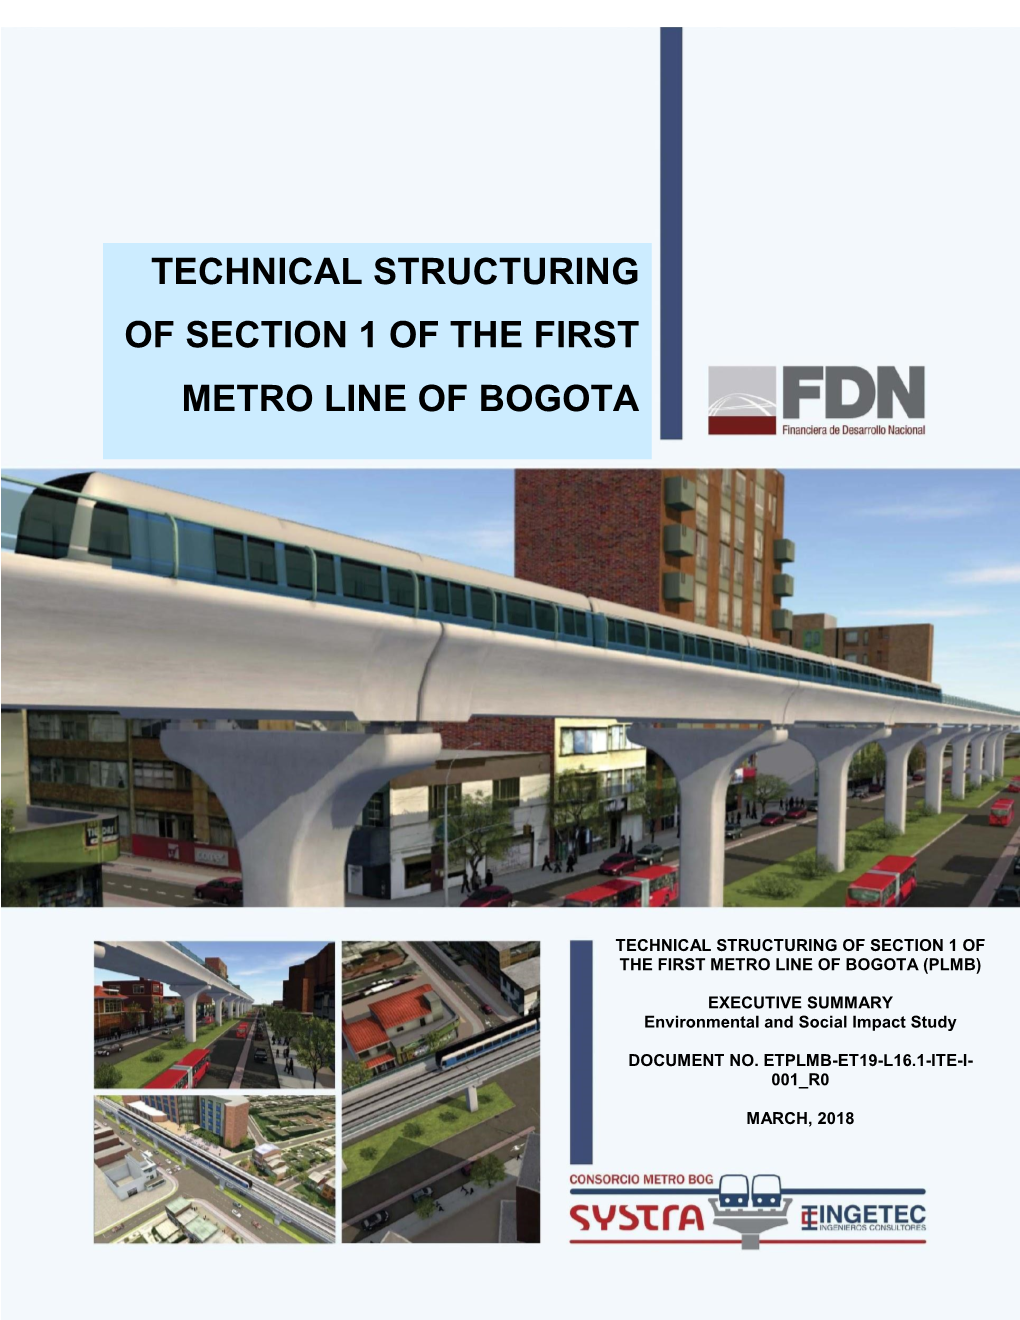 Technical Structuring of Section 1 of the First Metro Line of Bogota